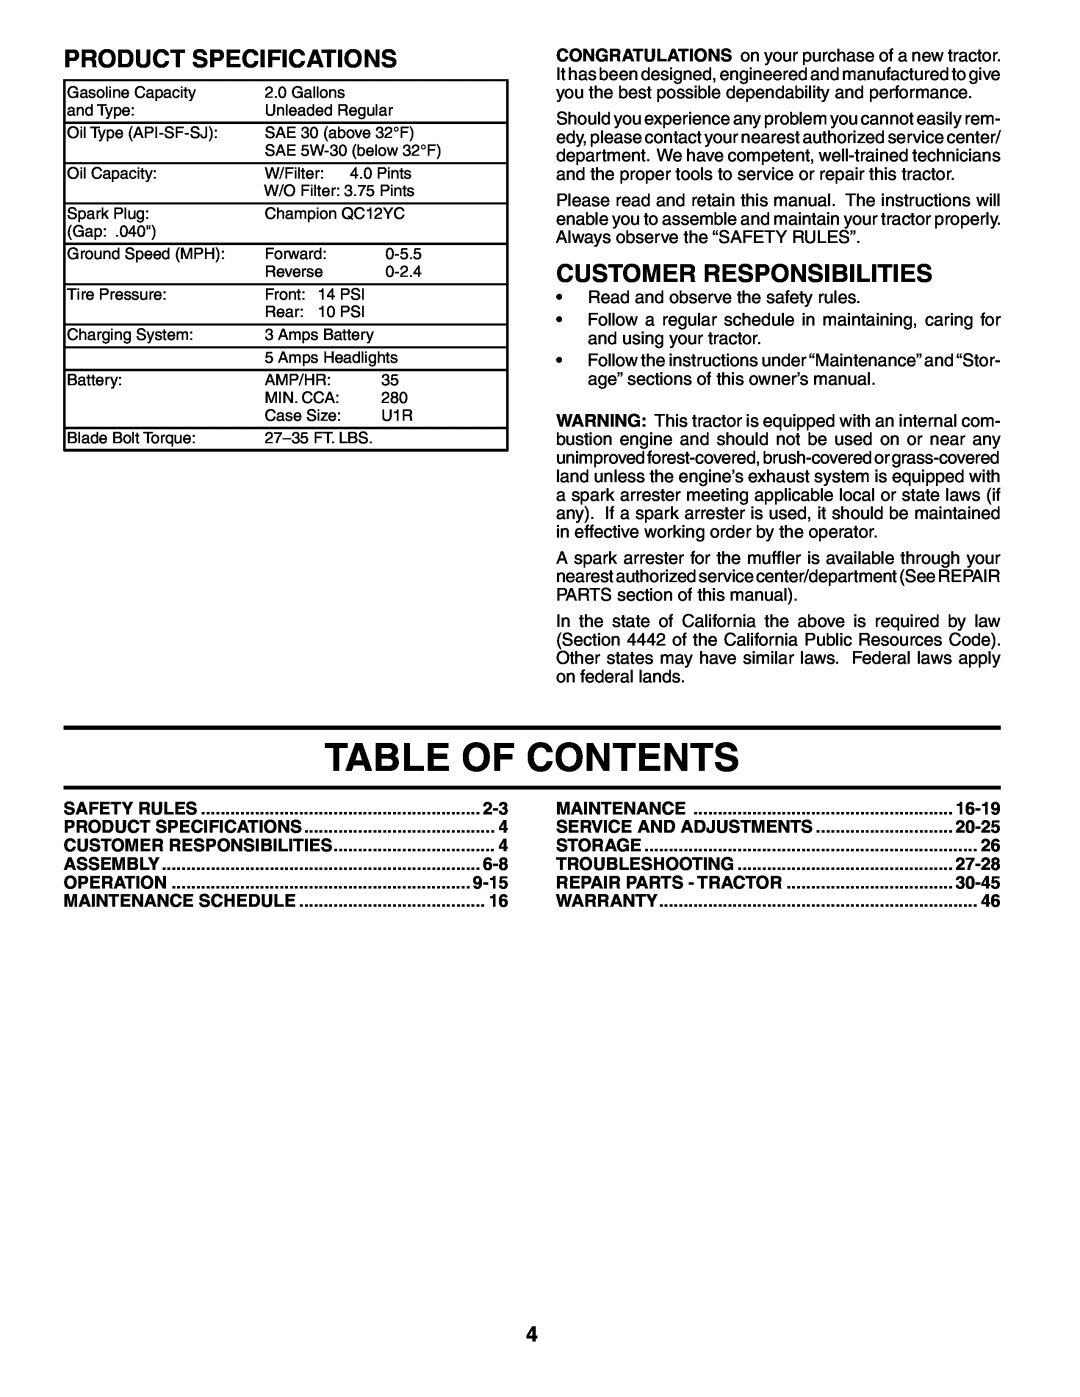 Poulan 954570925 Table Of Contents, Product Specifications, Customer Responsibilities, 9-15, 16-19, 20-25, 27-28, 30-45 